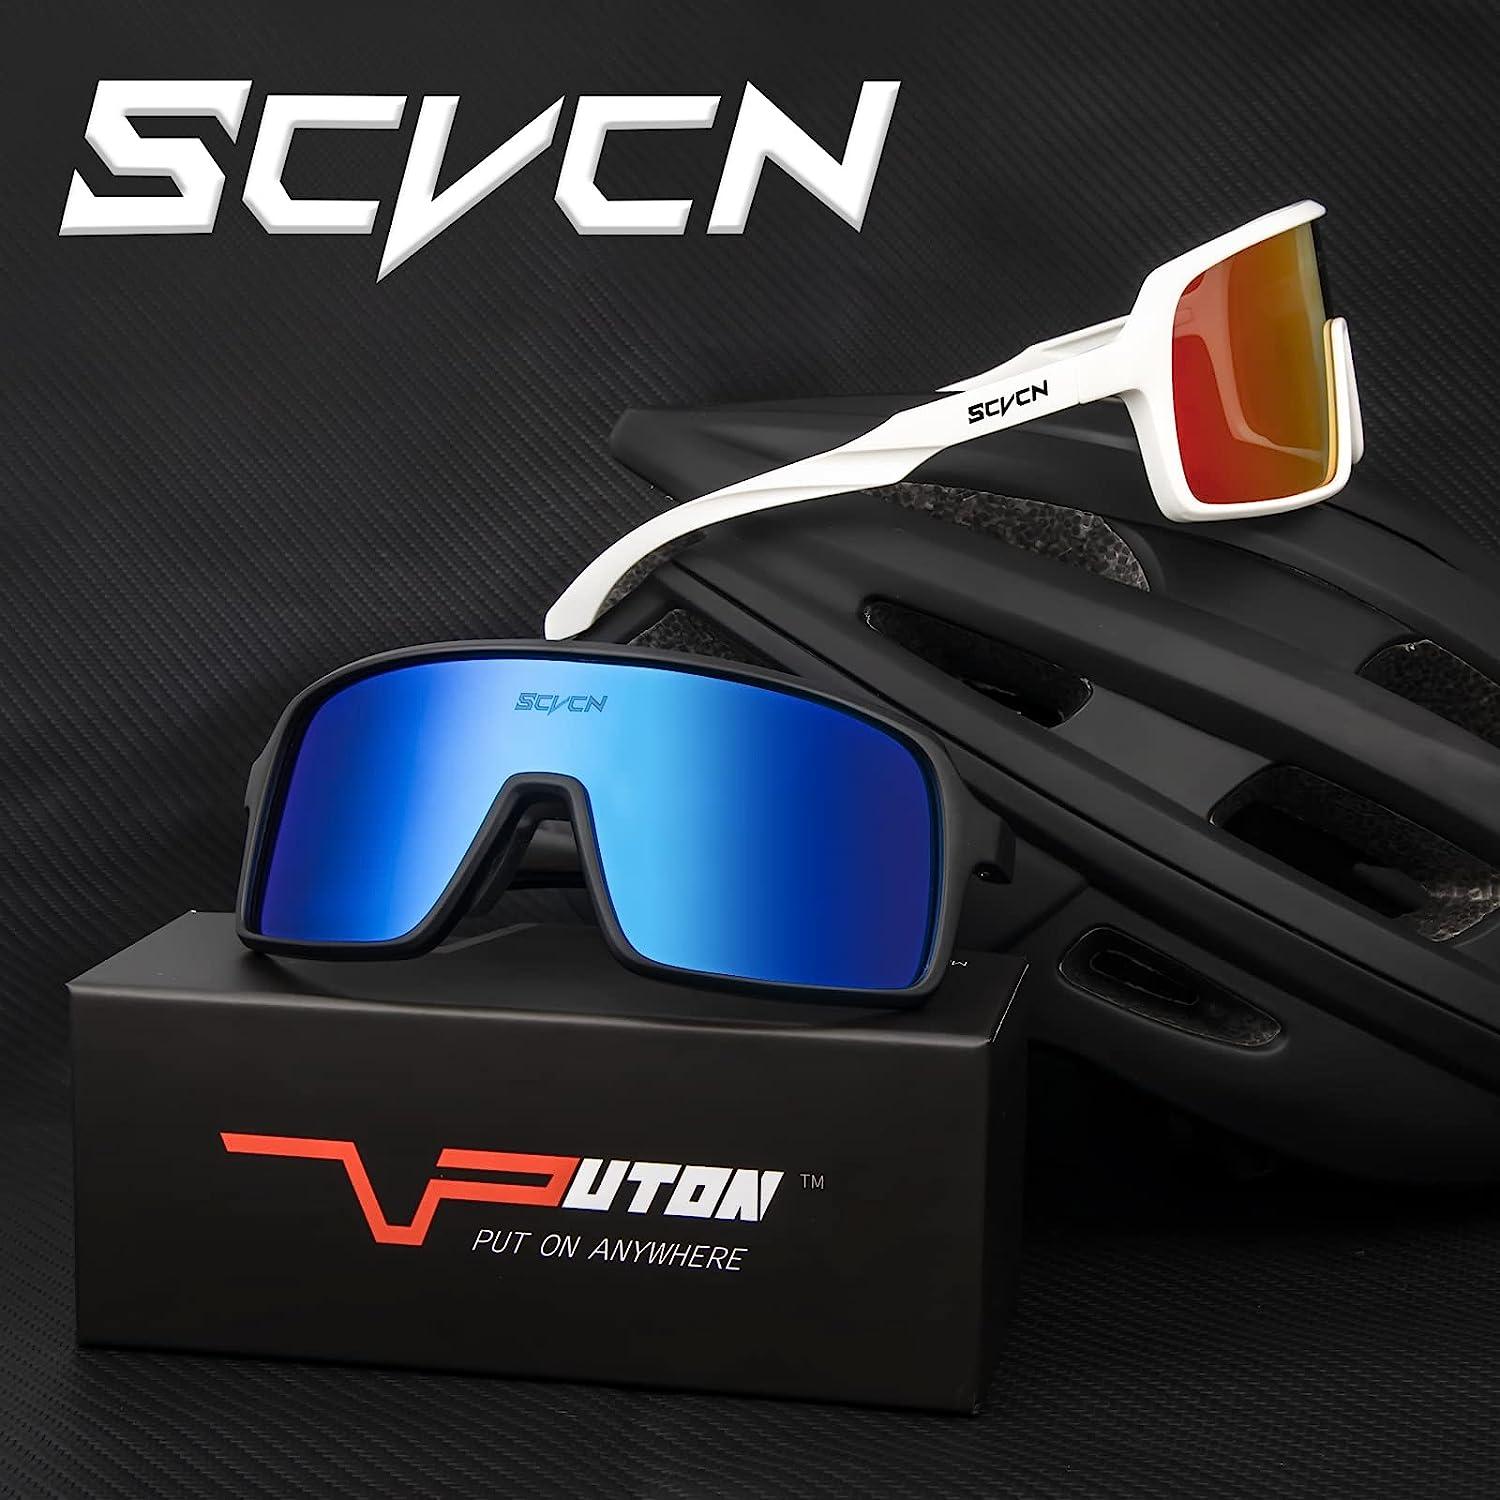 SCVCN New Model Polarized Colorful Sport Sunglasses, Men & Women, Suitable for Outdoor Activities Like Fishing, Cycling, Racing, Hiking and Camping